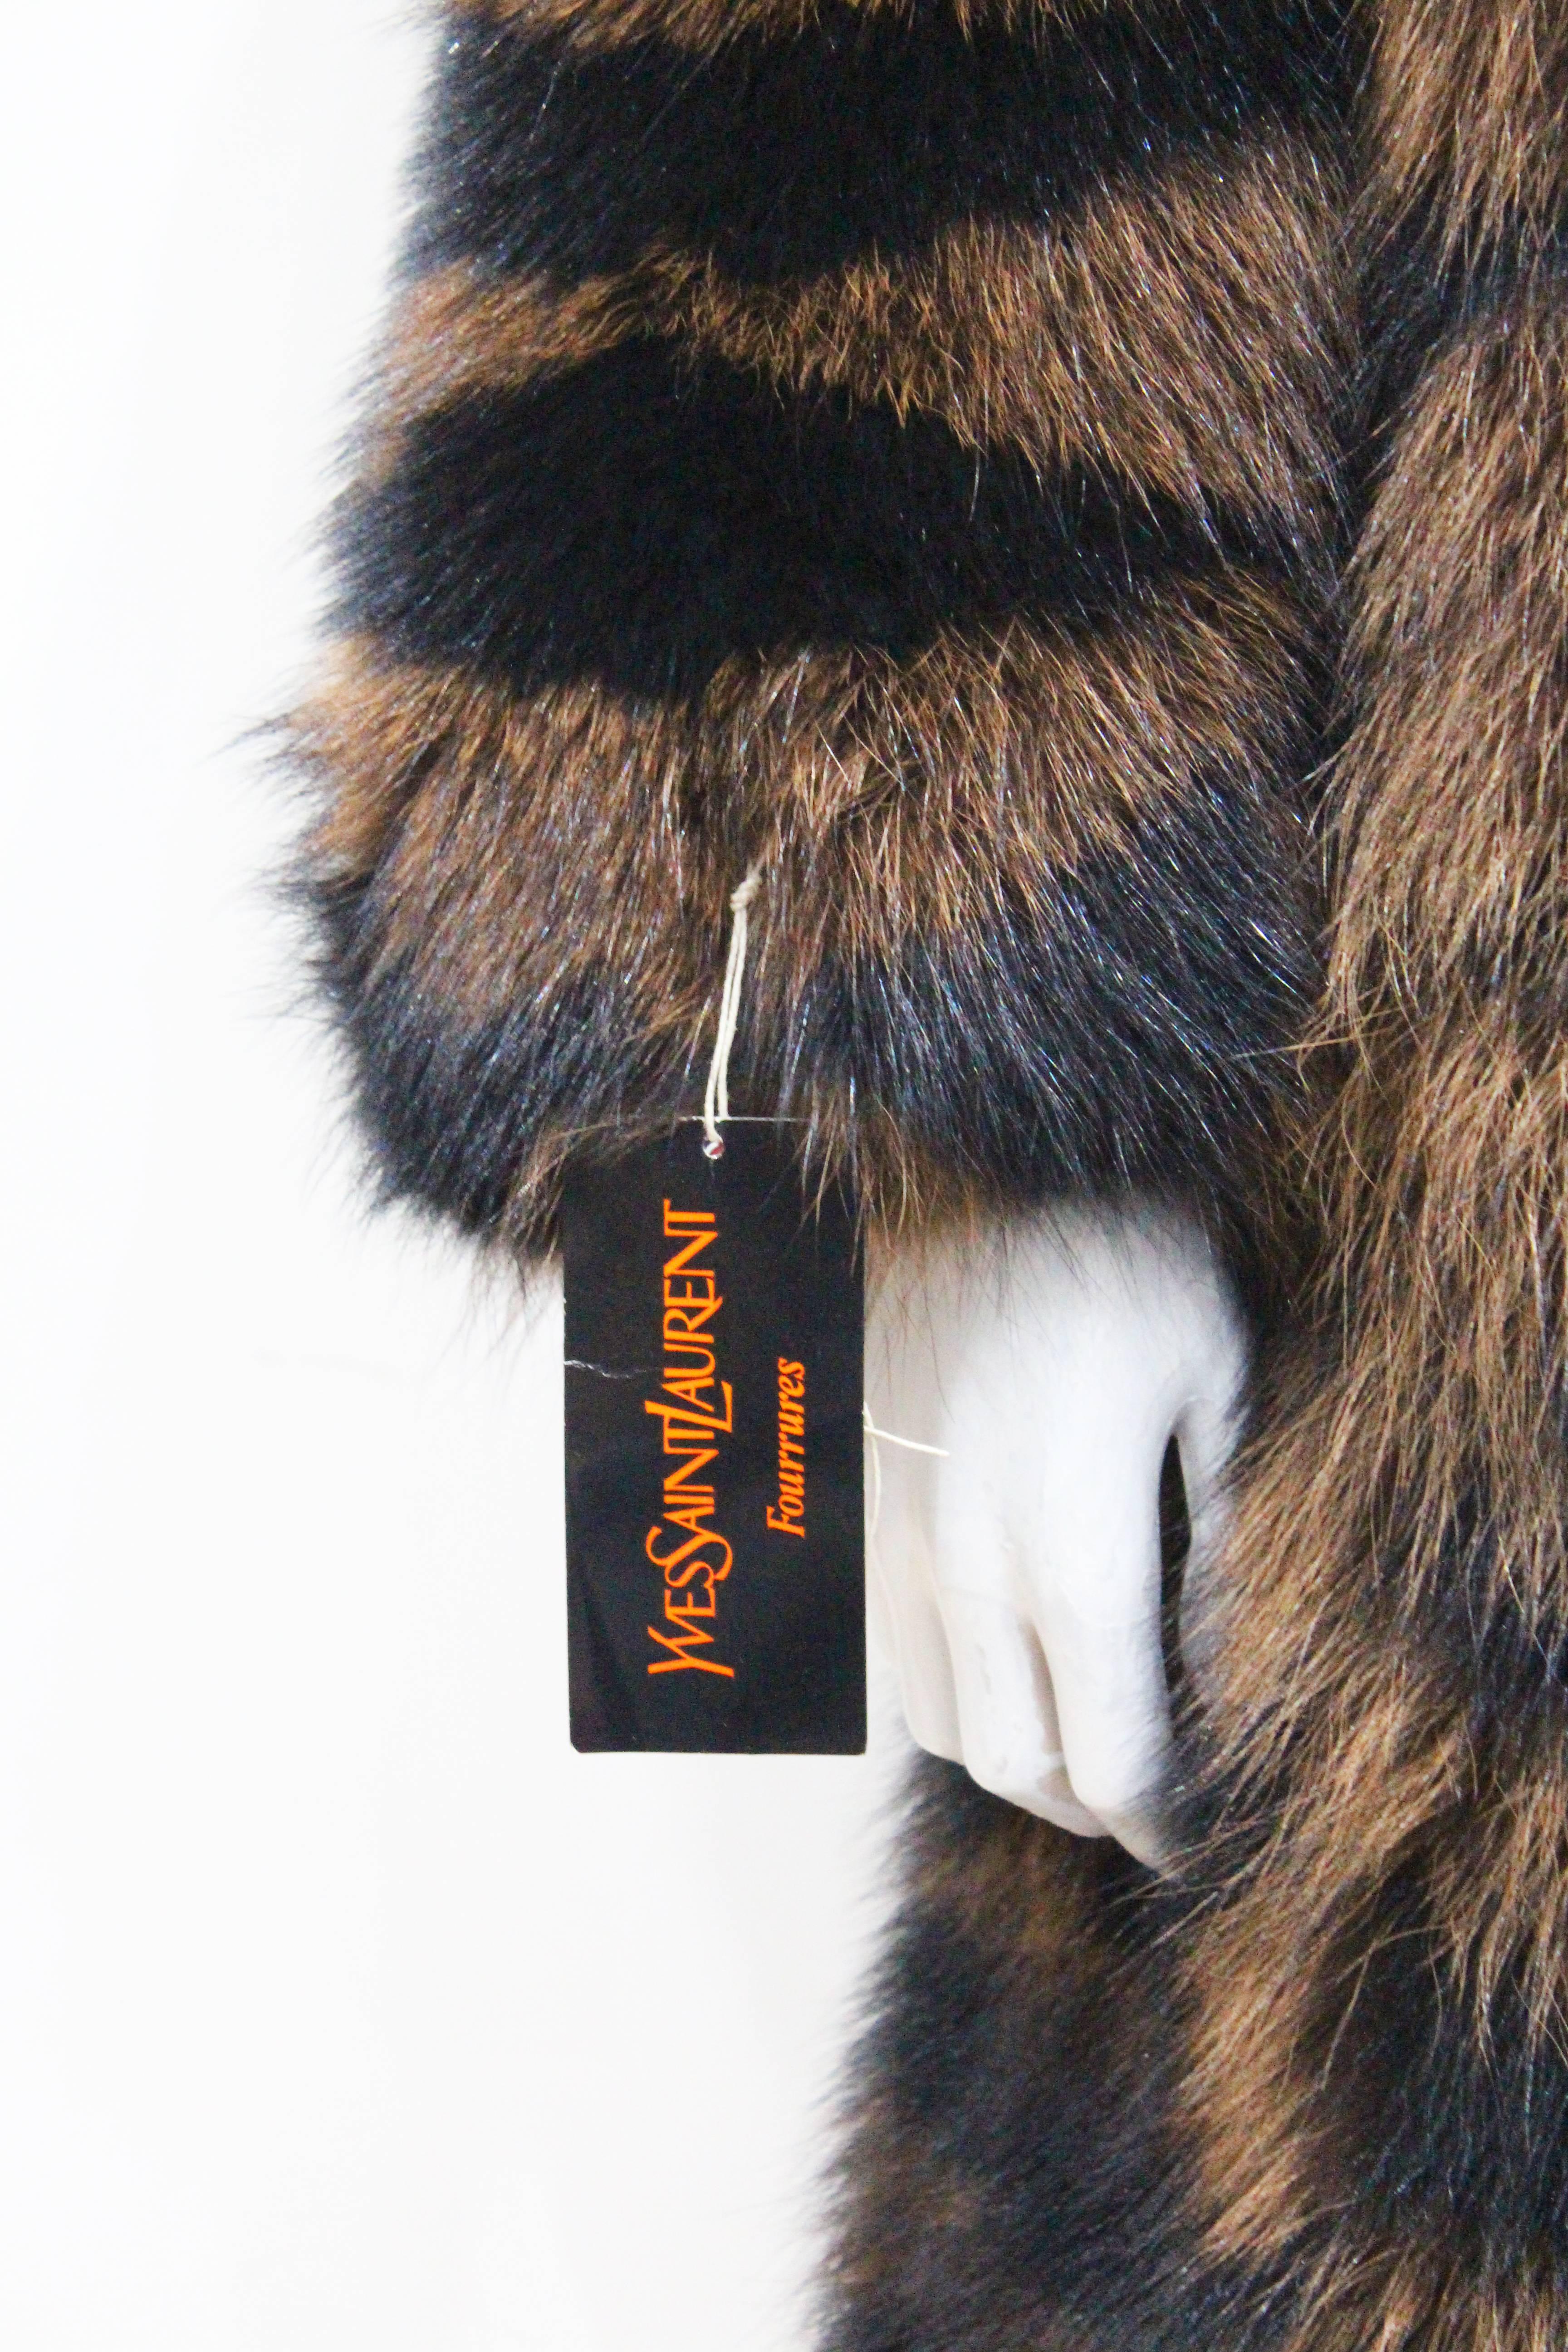 A Yves Saint Laurent beaver fur coat from the 1980s. The coat is in an oversized style and lined with 'YSL' monogram silk. No closure and hangs loosely. 

Brand new/unworn 

Fr 40 / UK 12 / Medium 